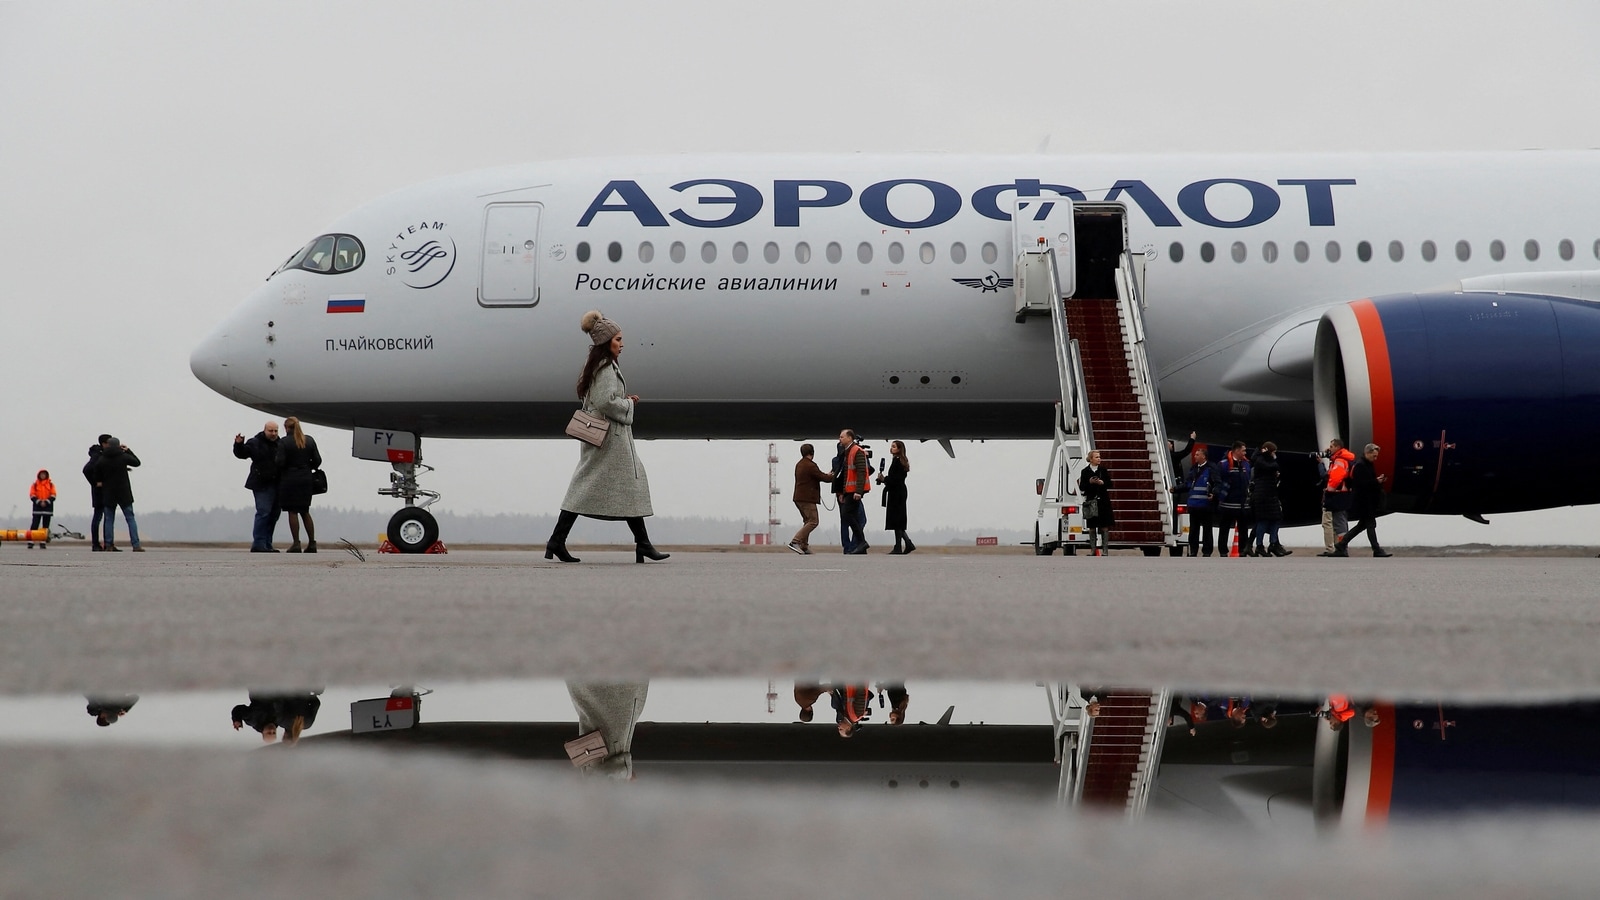 russian-airline-aeroflot-resumes-travel-services-to-sri-lanka-after-four-months